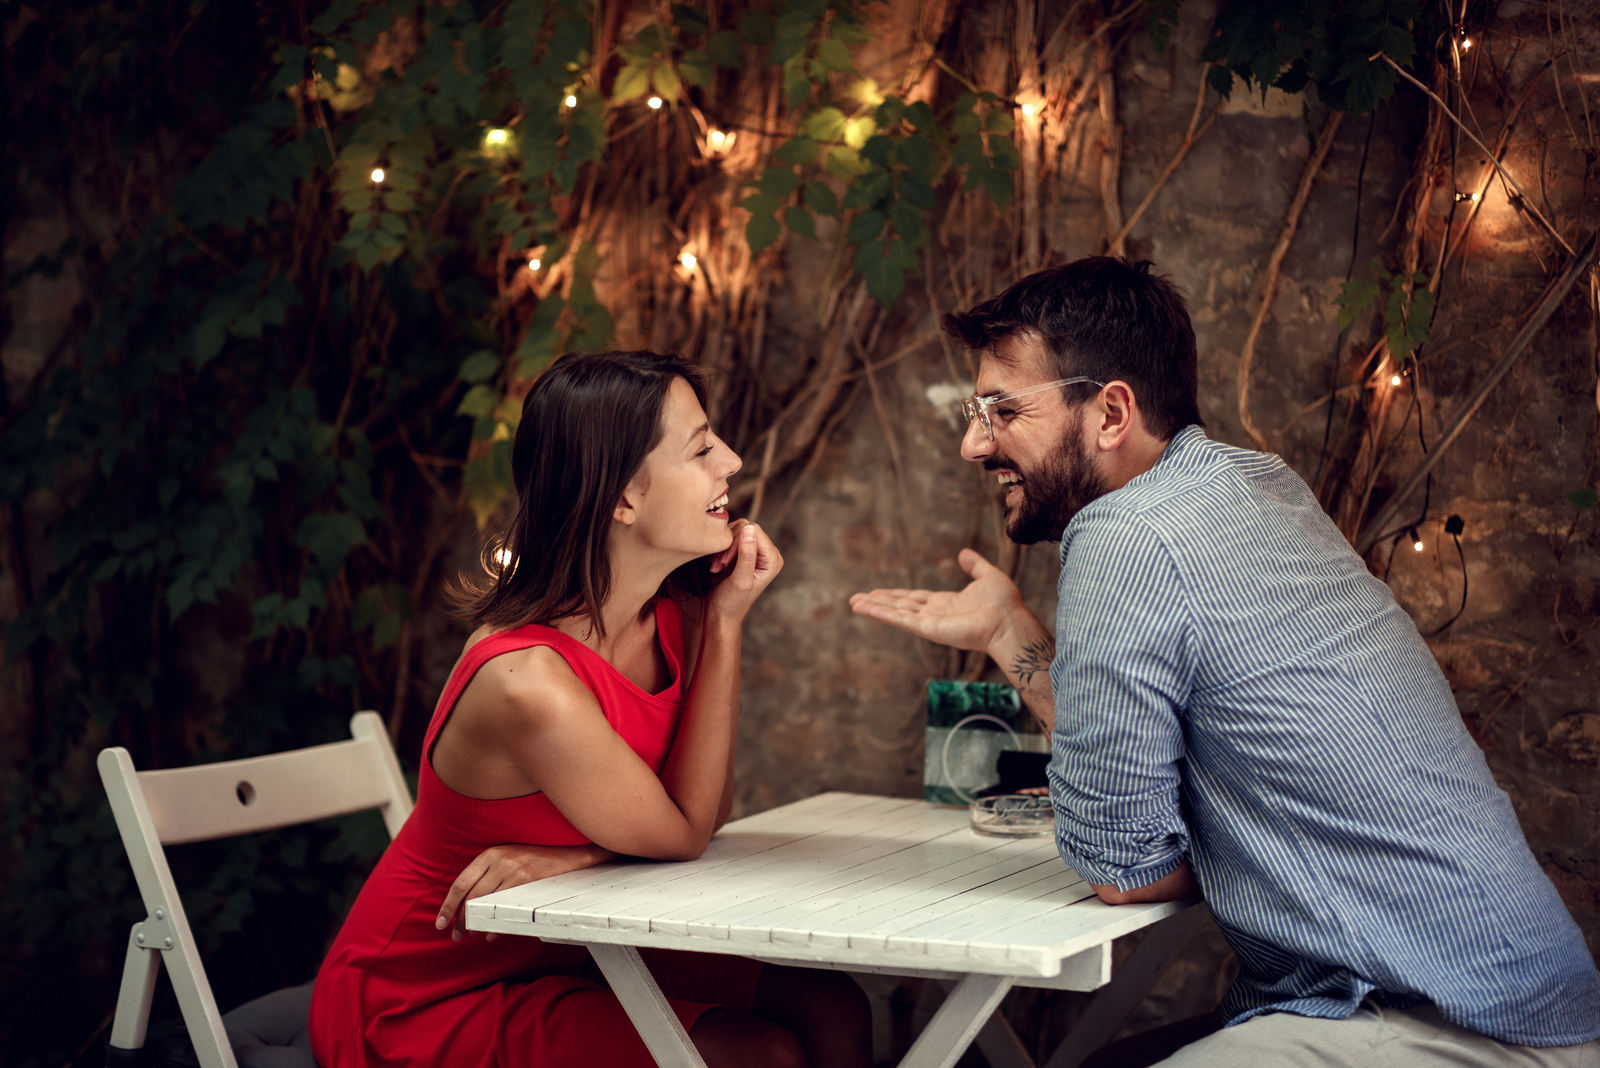 man and woman having a fun conversation on a date